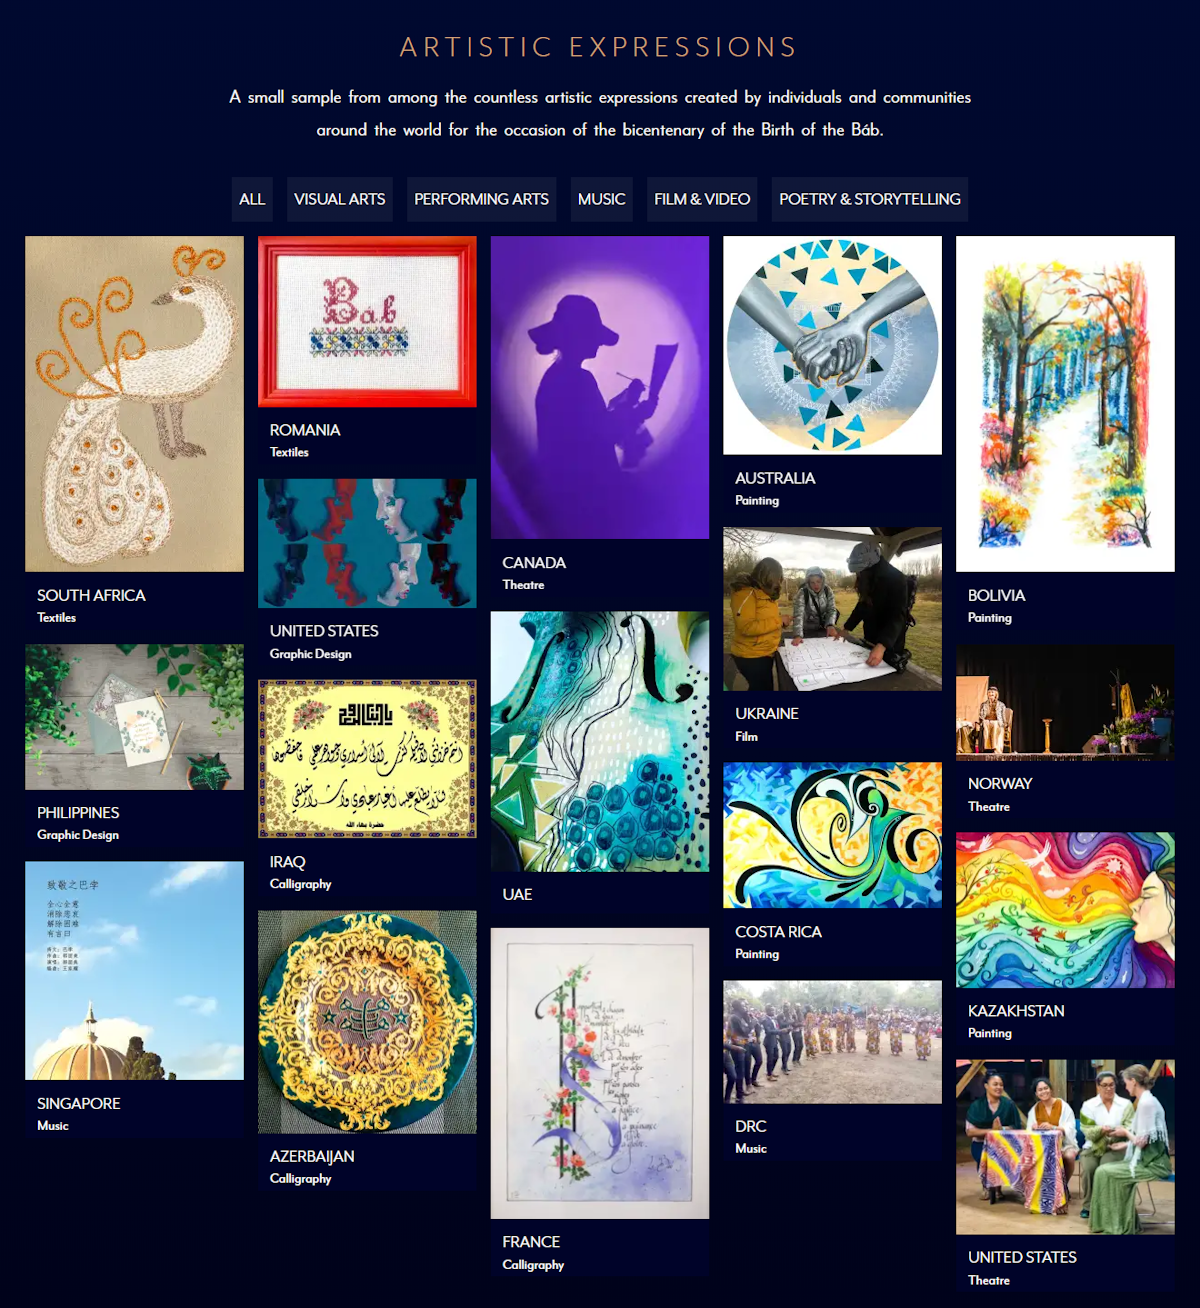 The bicentenary website features a small sample from among many artistic expressions created by individuals and communities around the world.